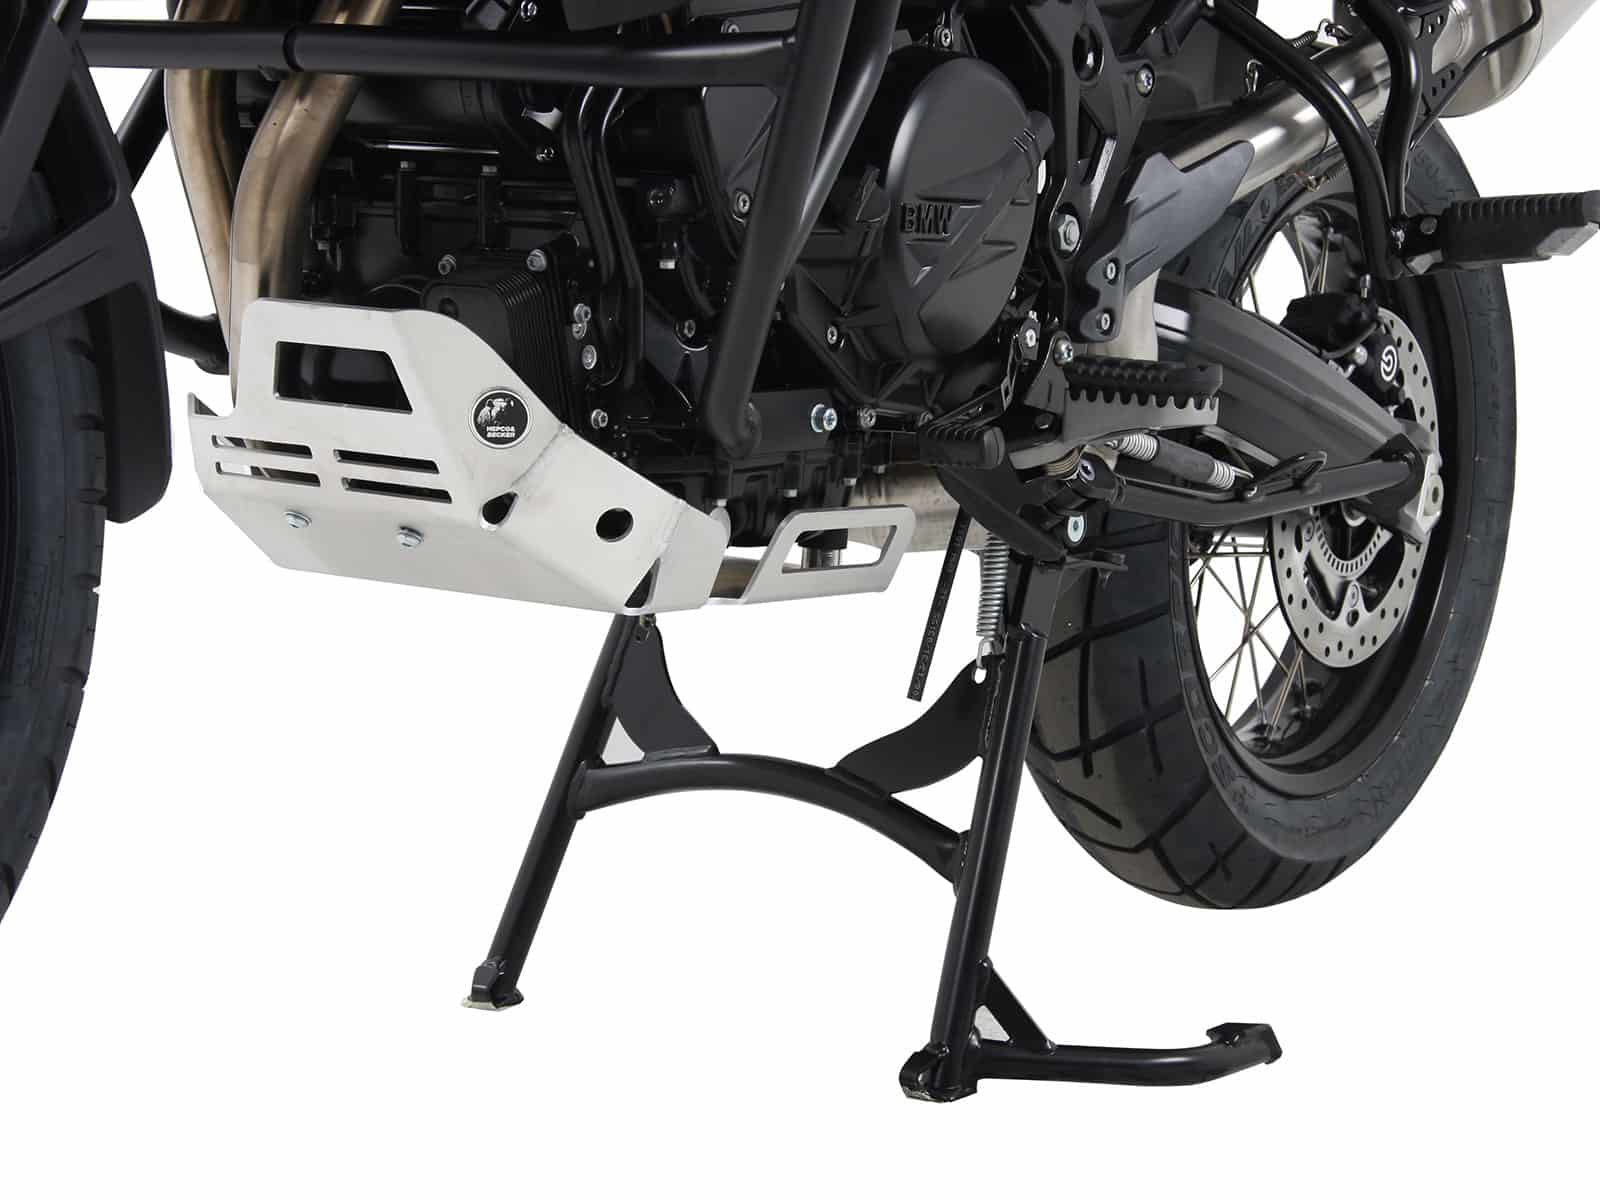 Engine protection plate aluminium for BMW F 800 GS Adventure (2013-2018)